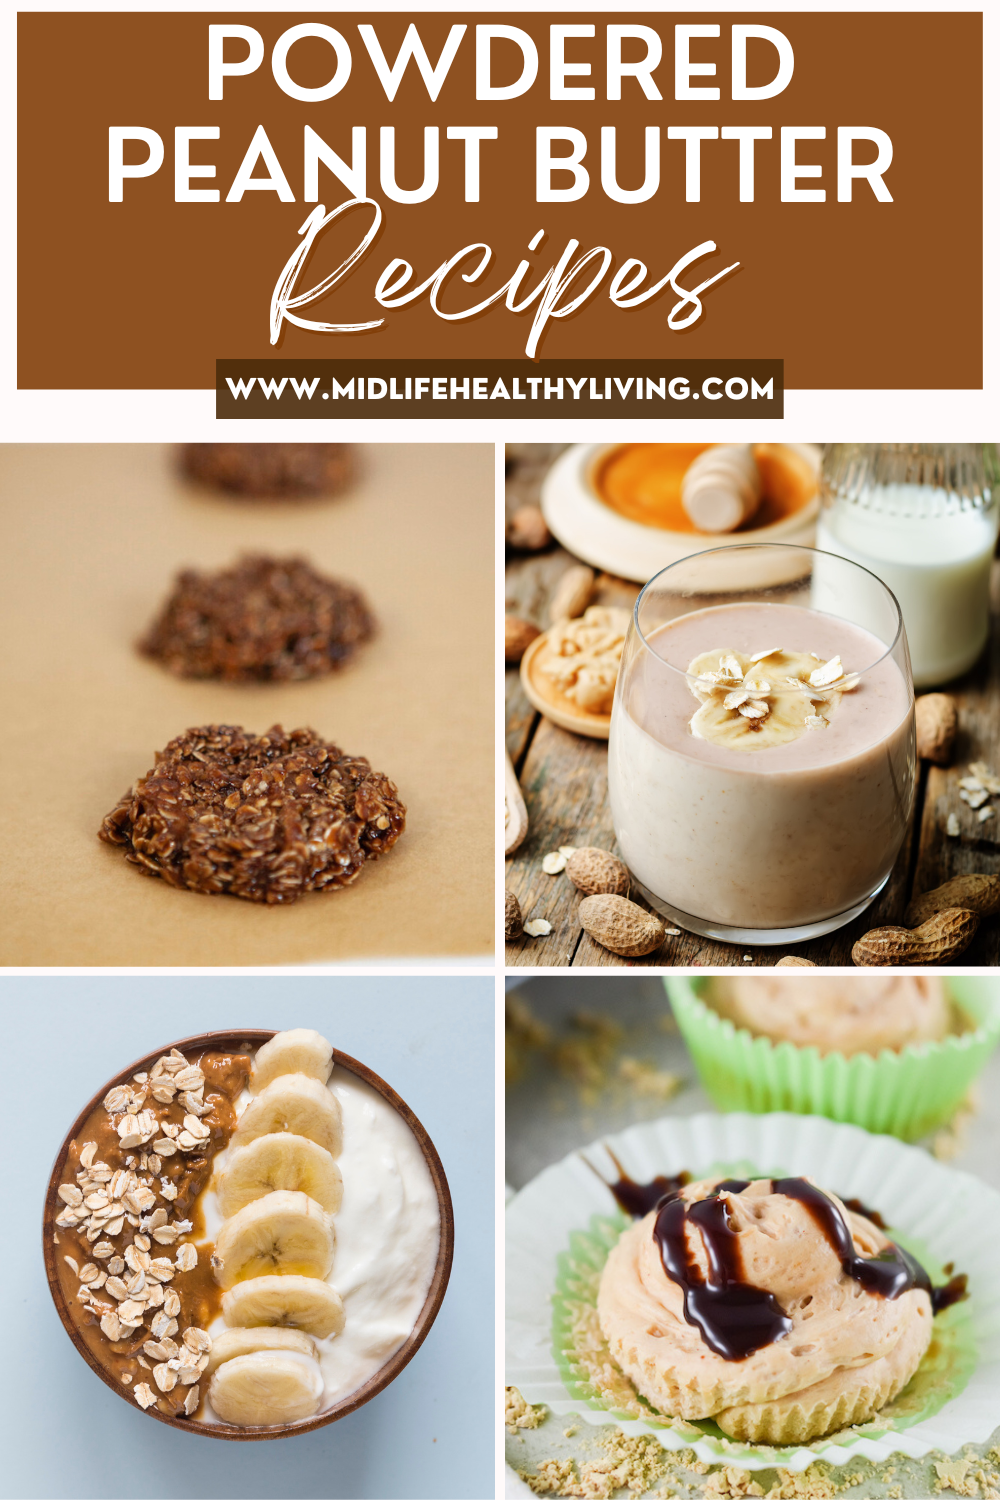 Pin showing the title Powdered Peanut Butter Recipes